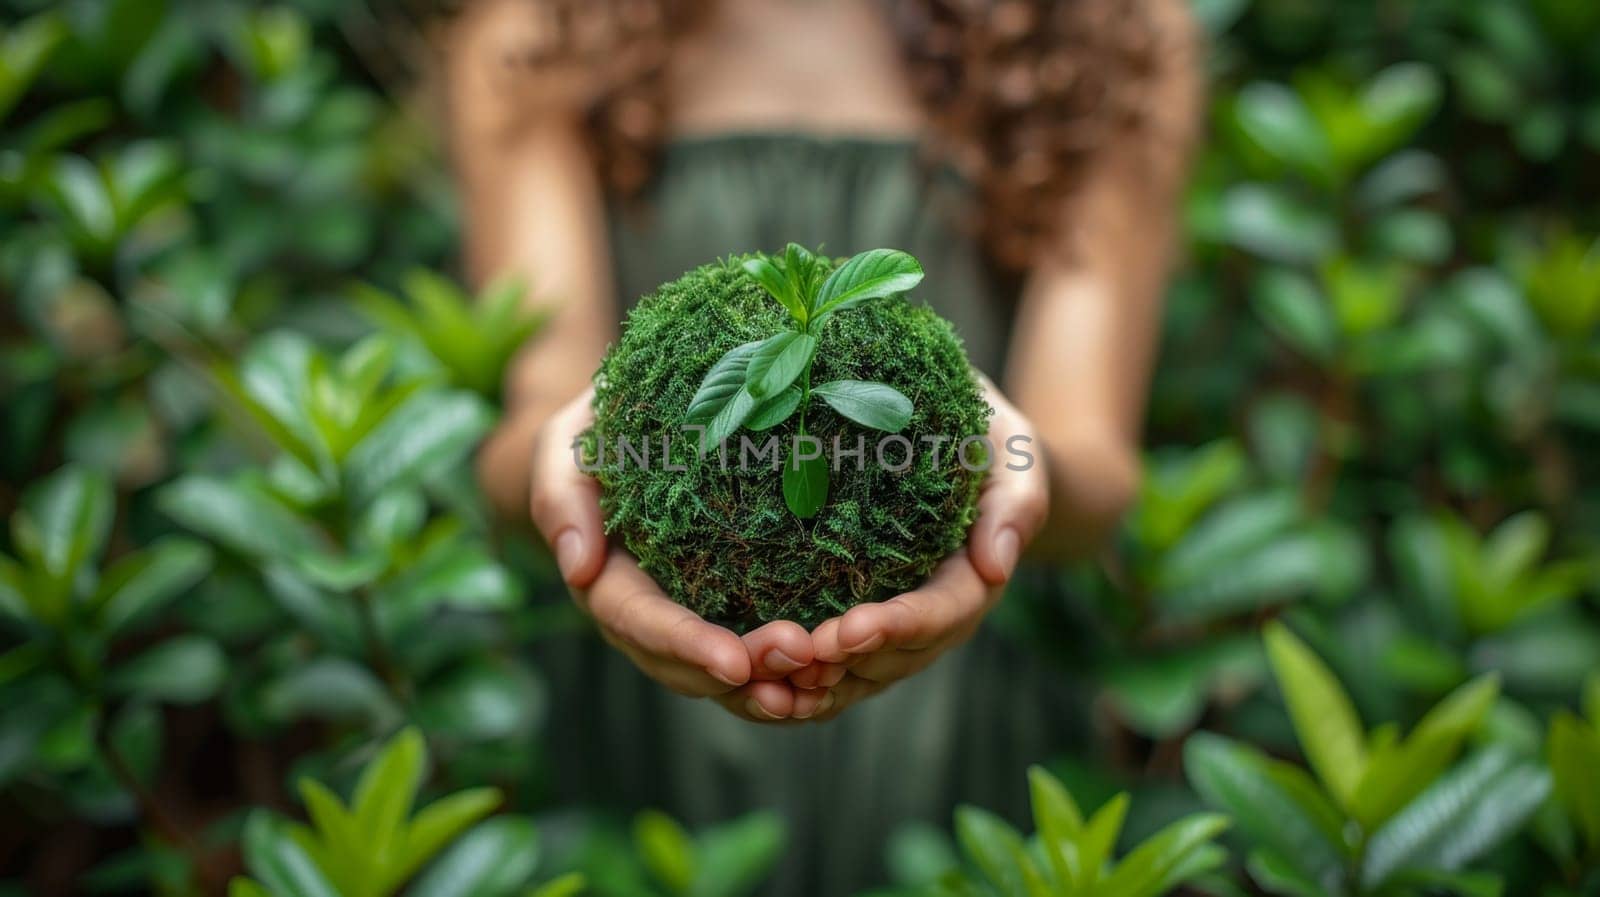 Hands holding a green sprout to grow. Environmental theme.